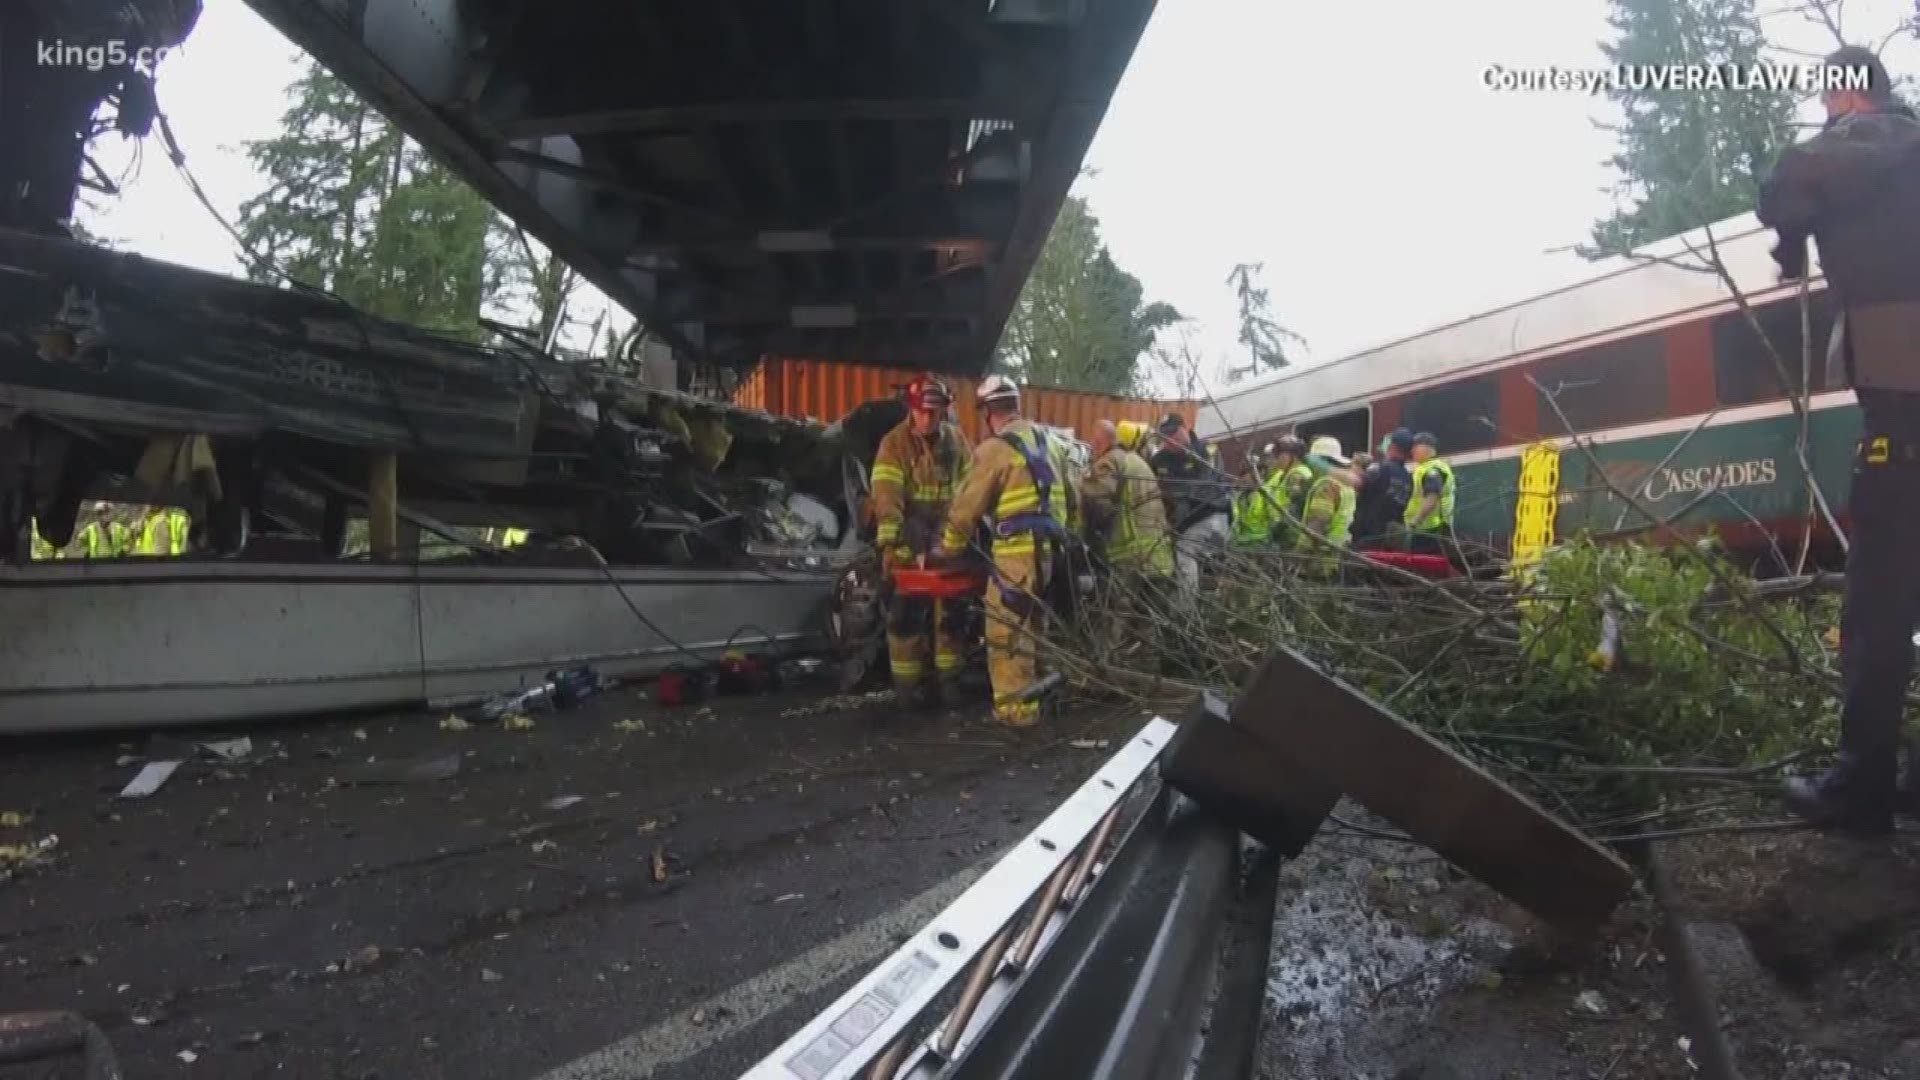 The video released by the Luvera Law Firm shows their client, Blaine Wilmotte, being rescued. Wilmotte and two Amtrak passengers are now suing Amtrak for damages related to the injuries they sustained in the derailment.